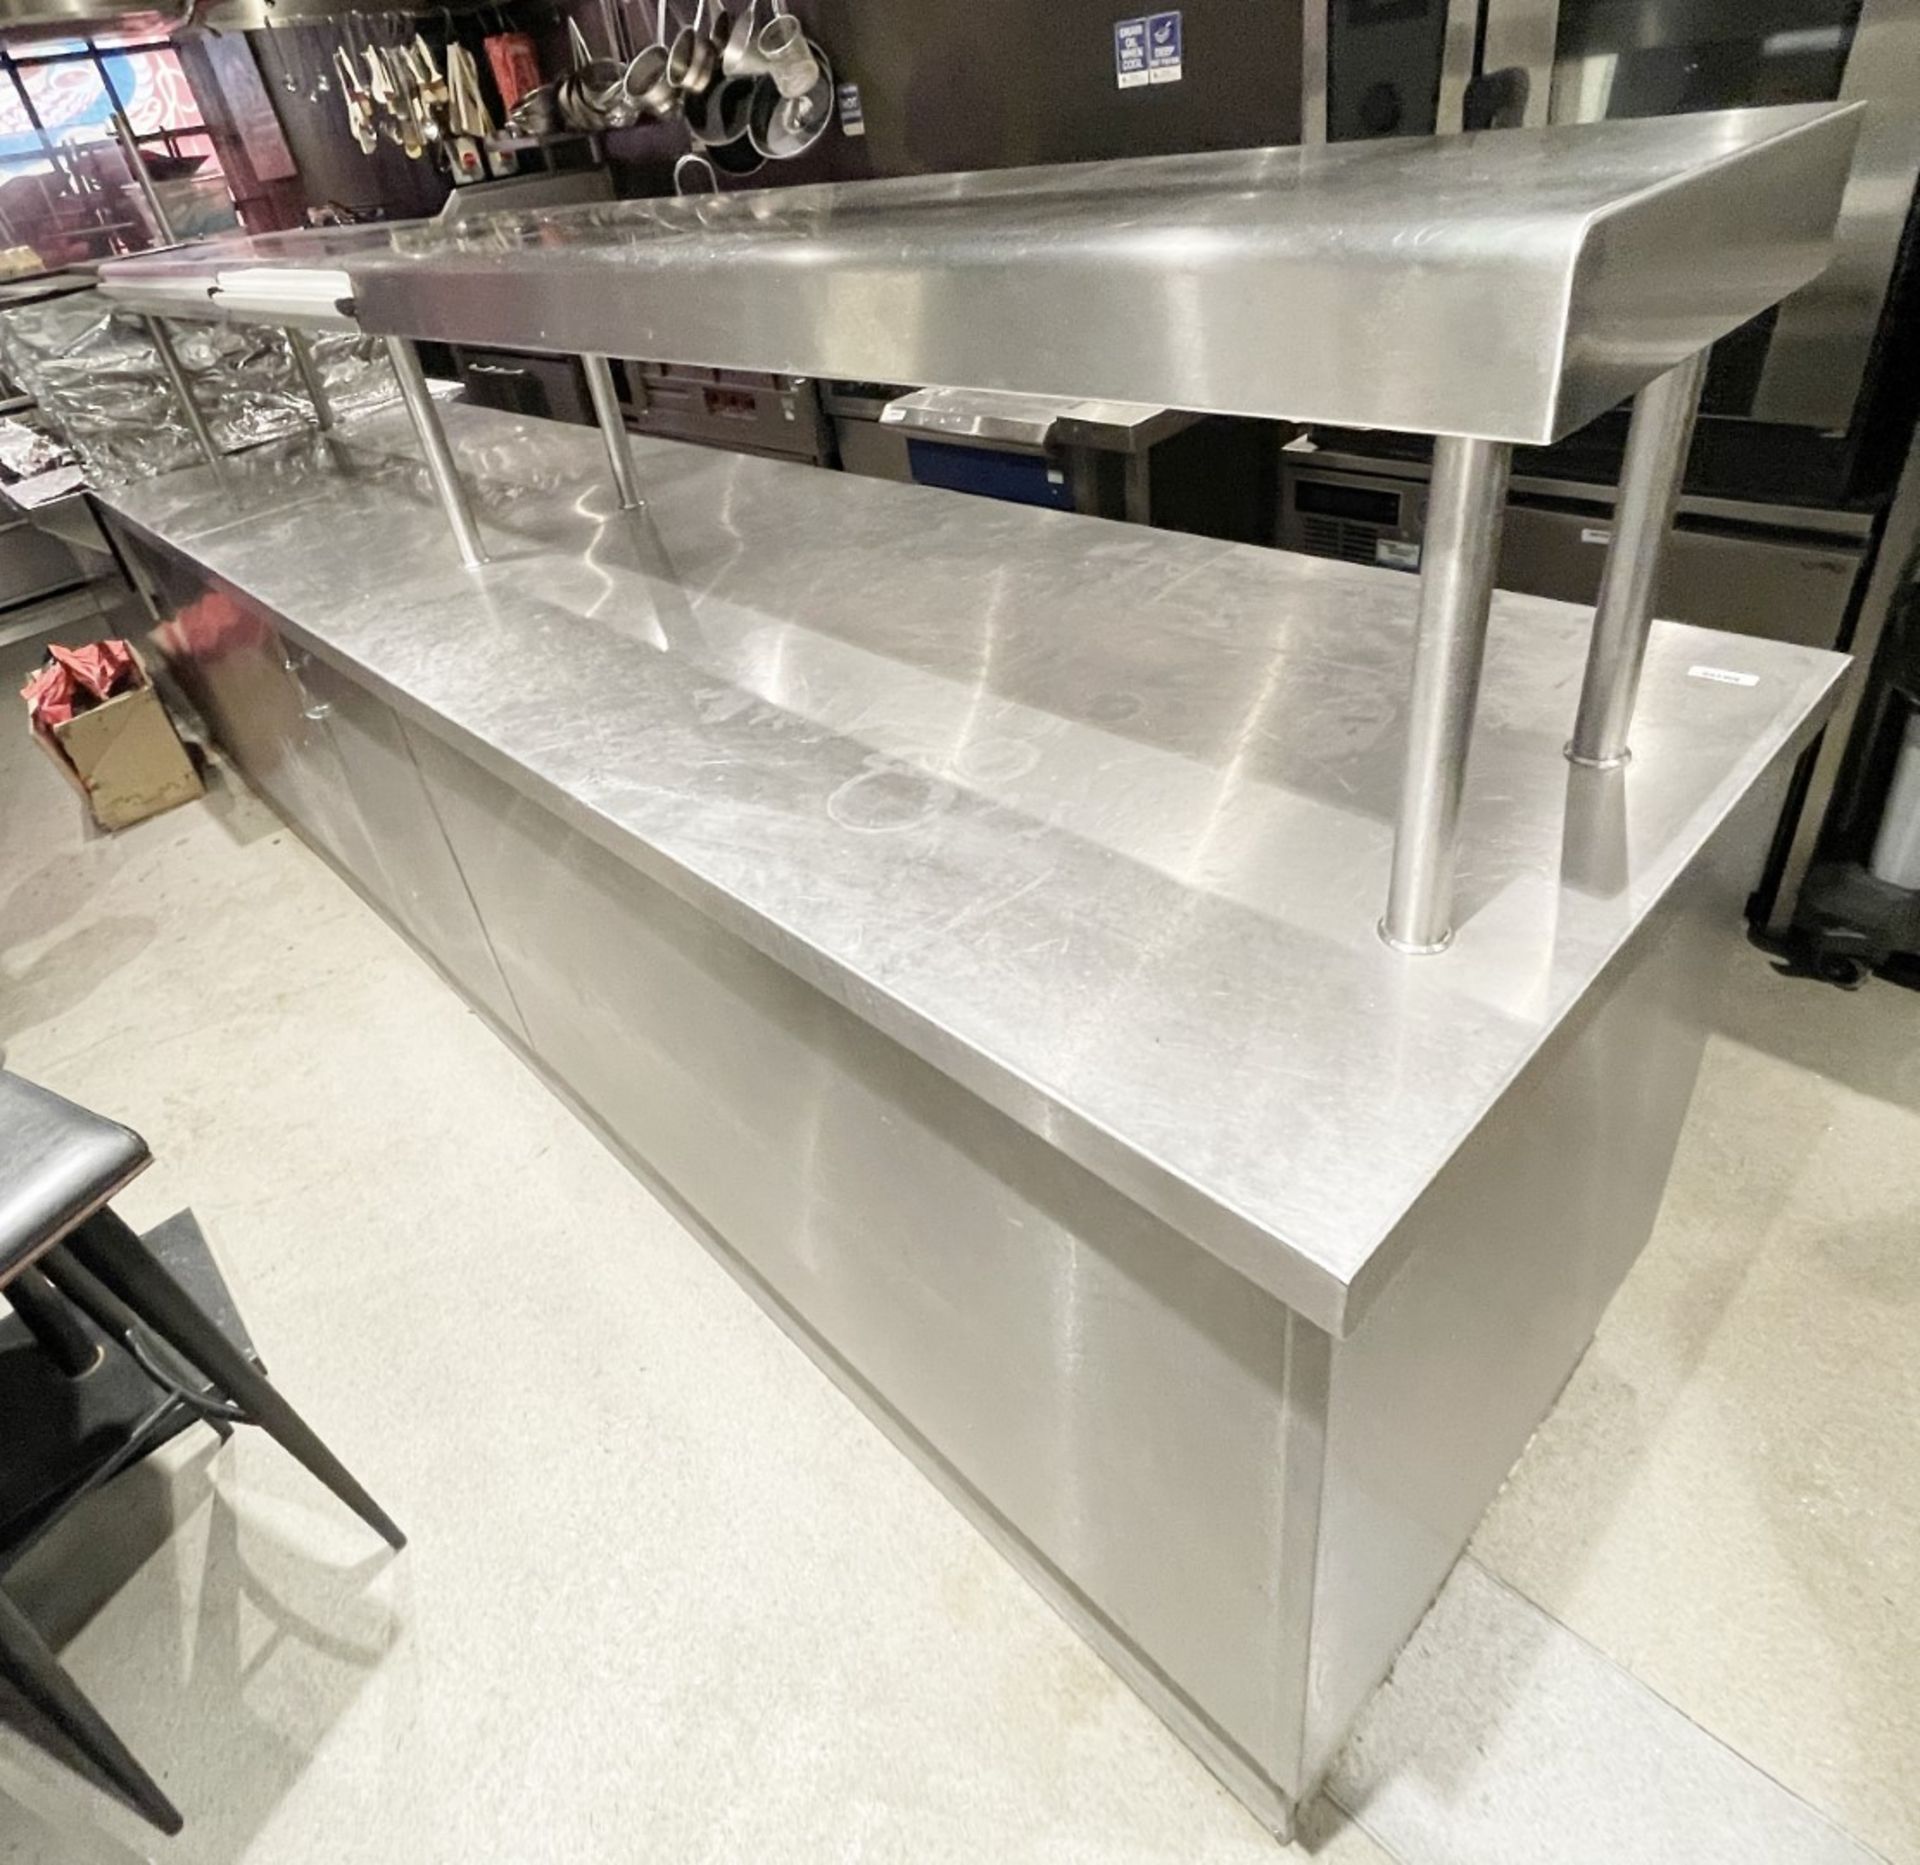 1 x Bespoke 15ft Commercial Kitchen Preparation Island with a Stainless Steel Construction